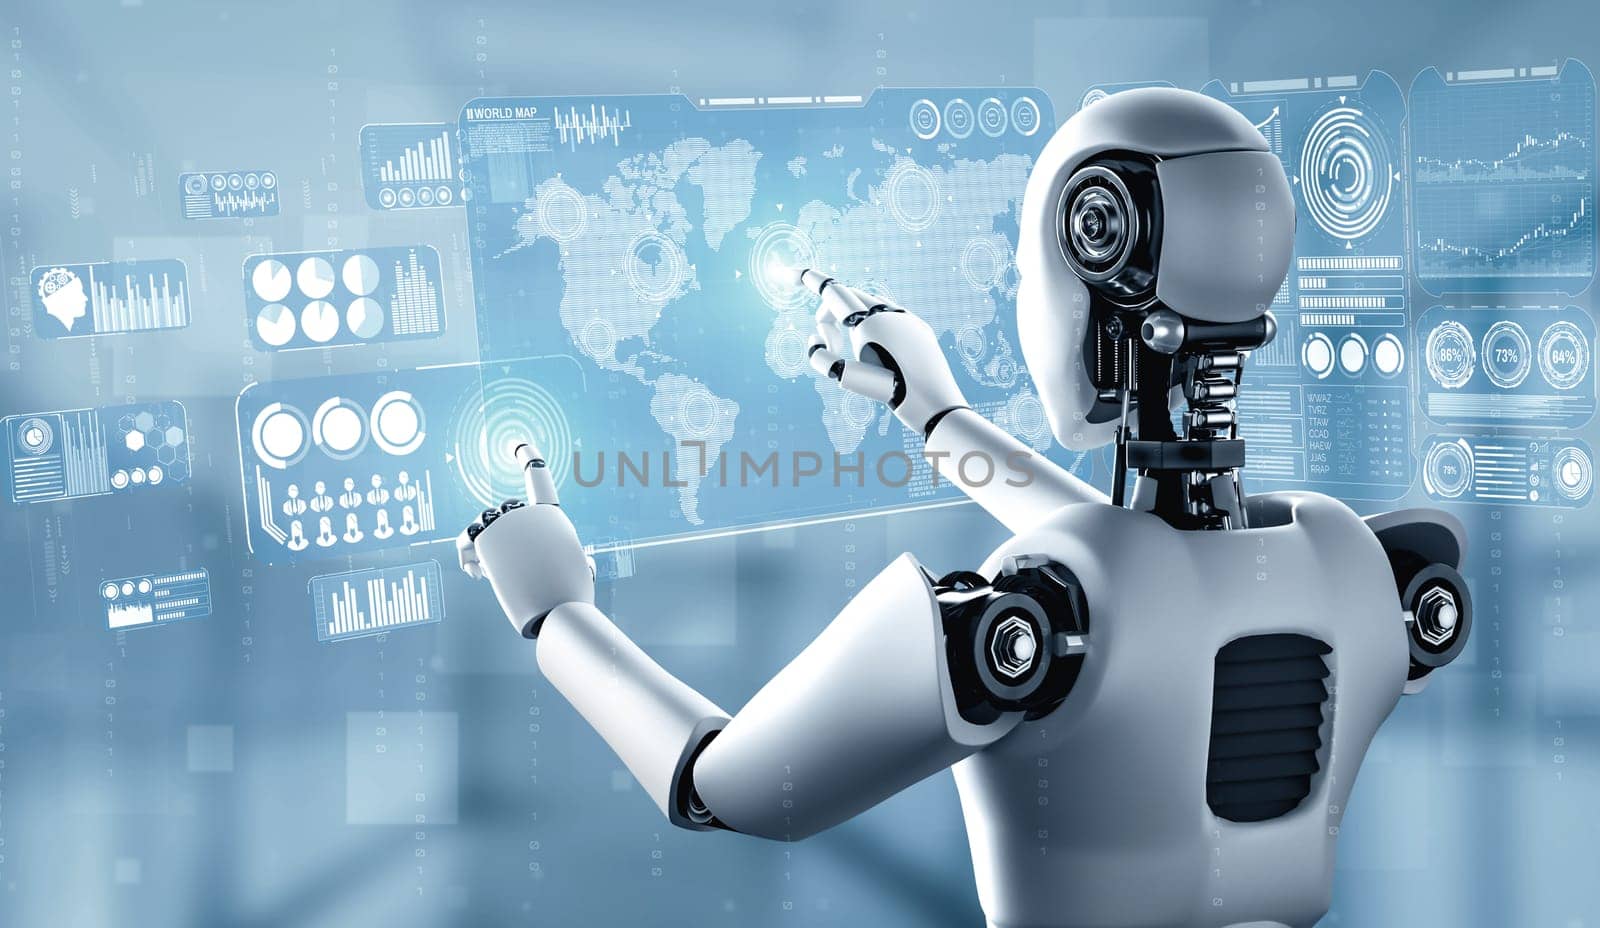 XAI 3d illustration AI humanoid robot touching hologram screen shows concept of global communication network using artificial intelligence thinking by machine learning process. 3D illustration computer graphic.